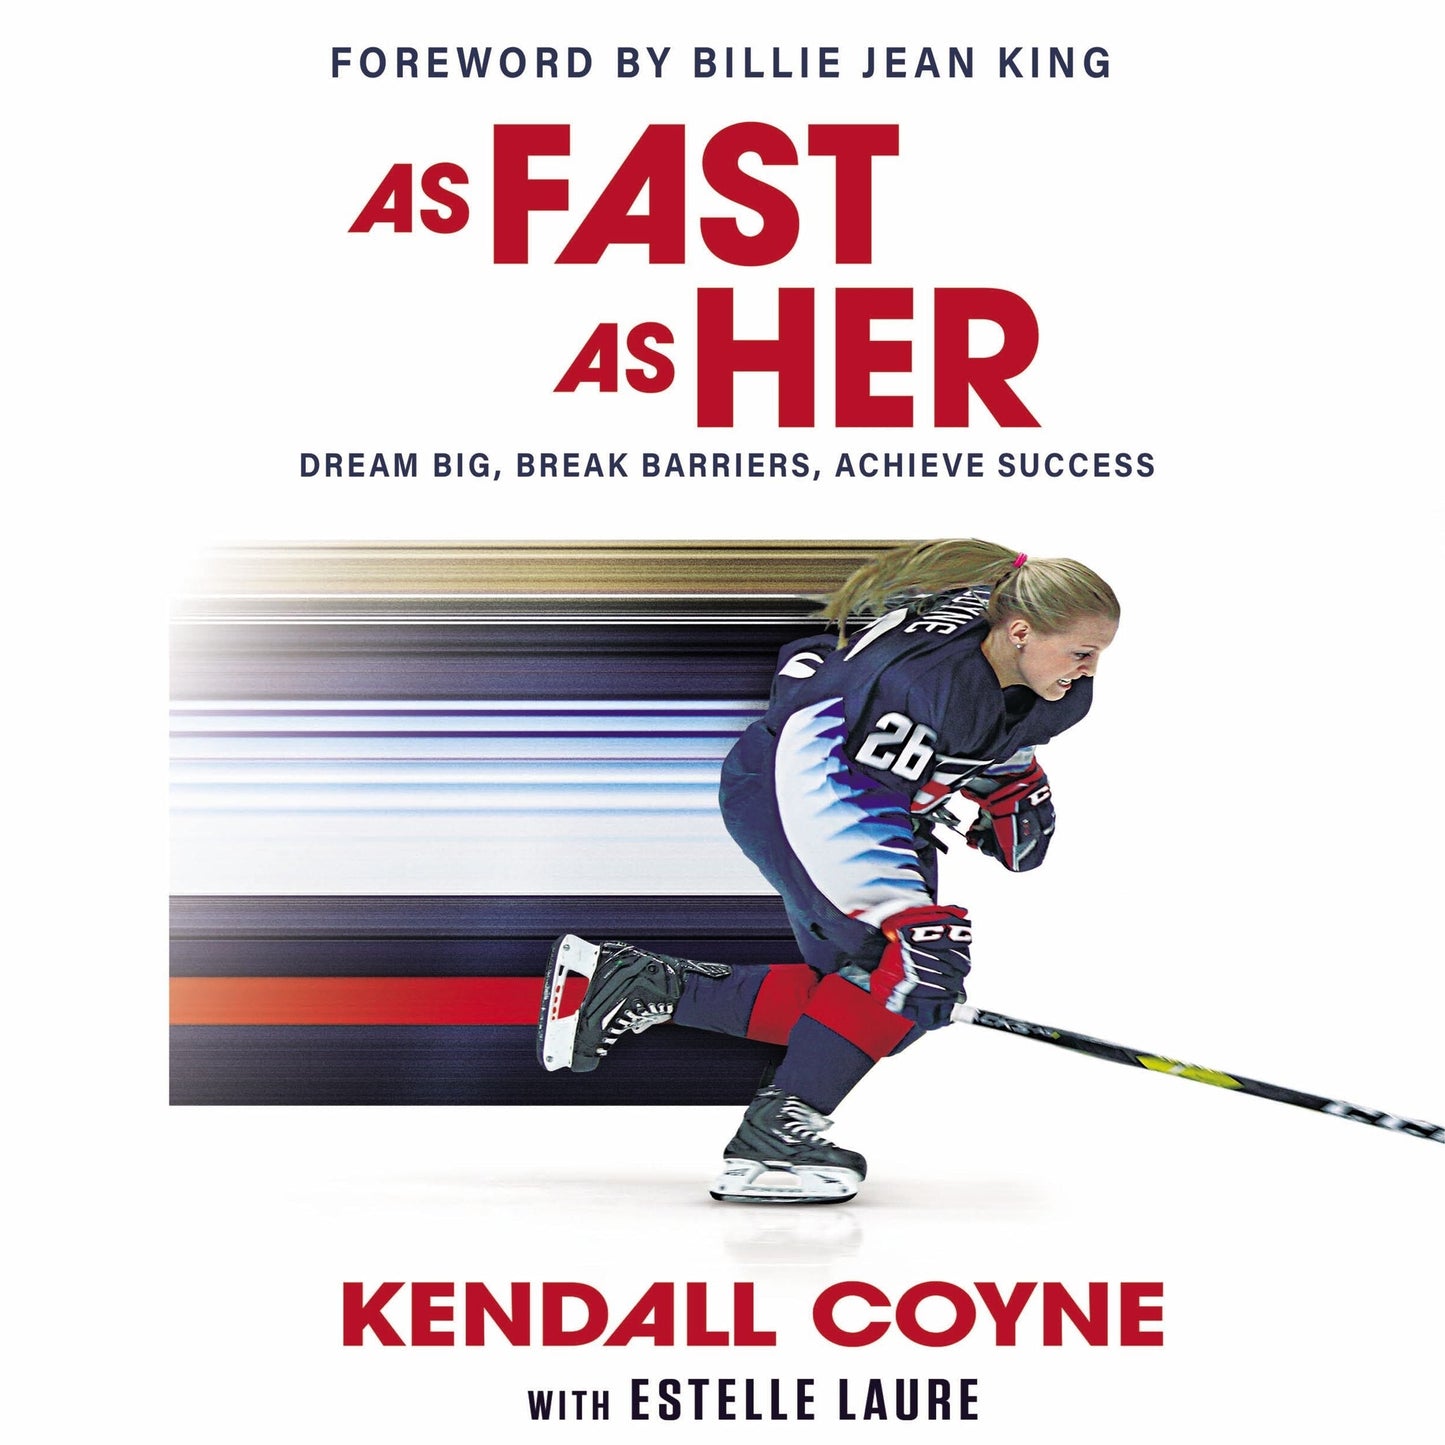 As Fast as Her: Dream Big, Break Barriers, Achieve Success - Coyne, Kendall (Hardcover)-Young Adult Biography-9780310771135-BookBizCanada